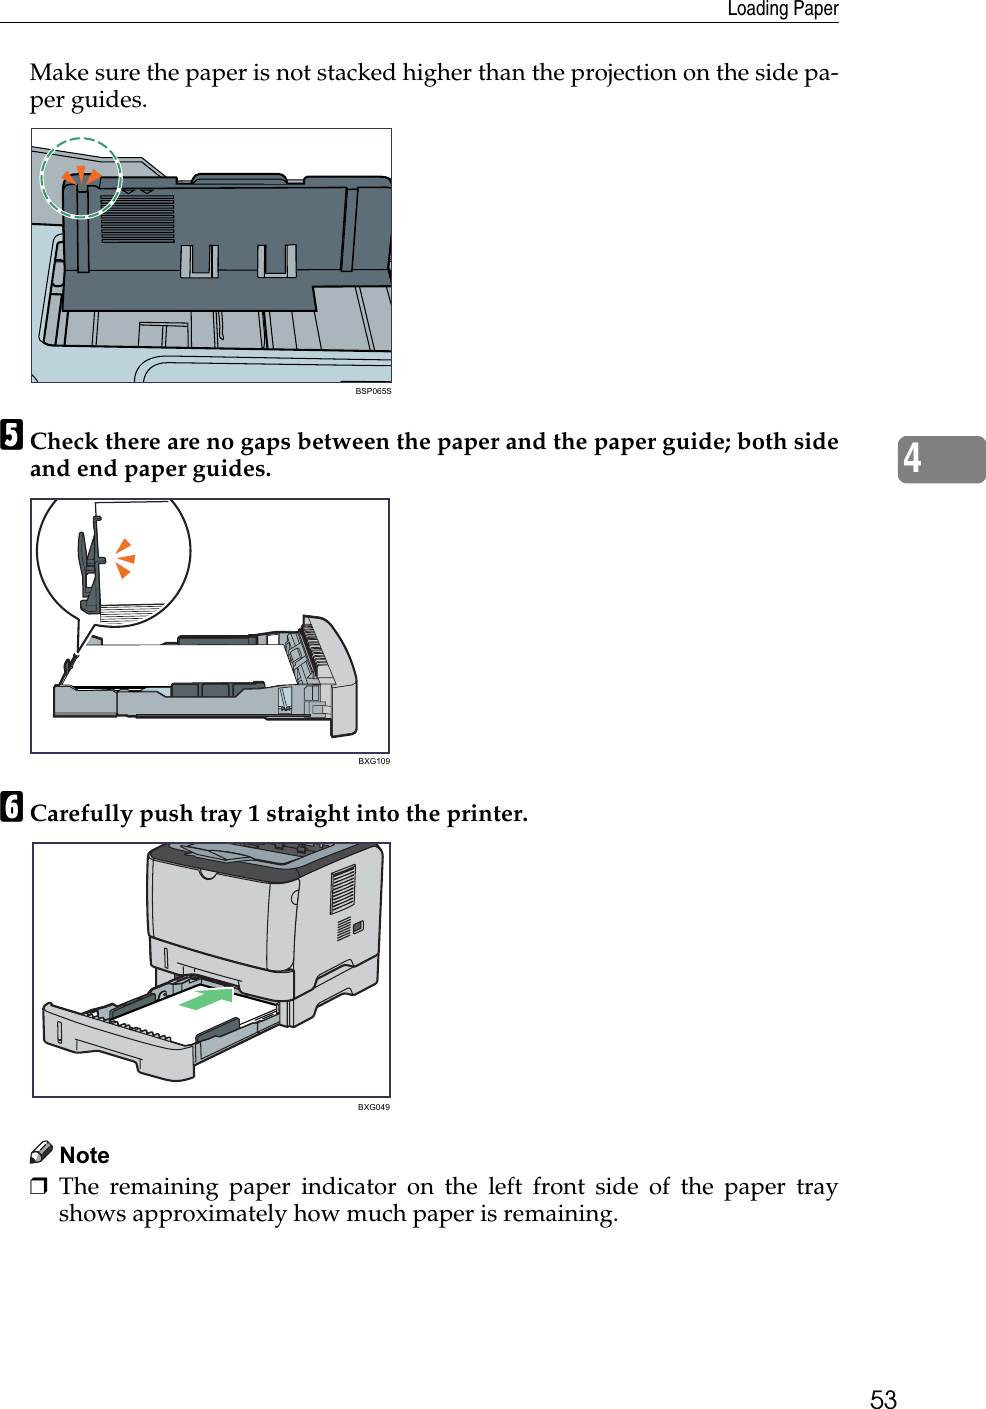 Loading Paper534Make sure the paper is not stacked higher than the projection on the side pa-per guides.ECheck there are no gaps between the paper and the paper guide; both sideand end paper guides.FCarefully push tray 1 straight into the printer.Note❒The remaining paper indicator on the left front side of the paper trayshows approximately how much paper is remaining.BSP065SBXG109BXG049